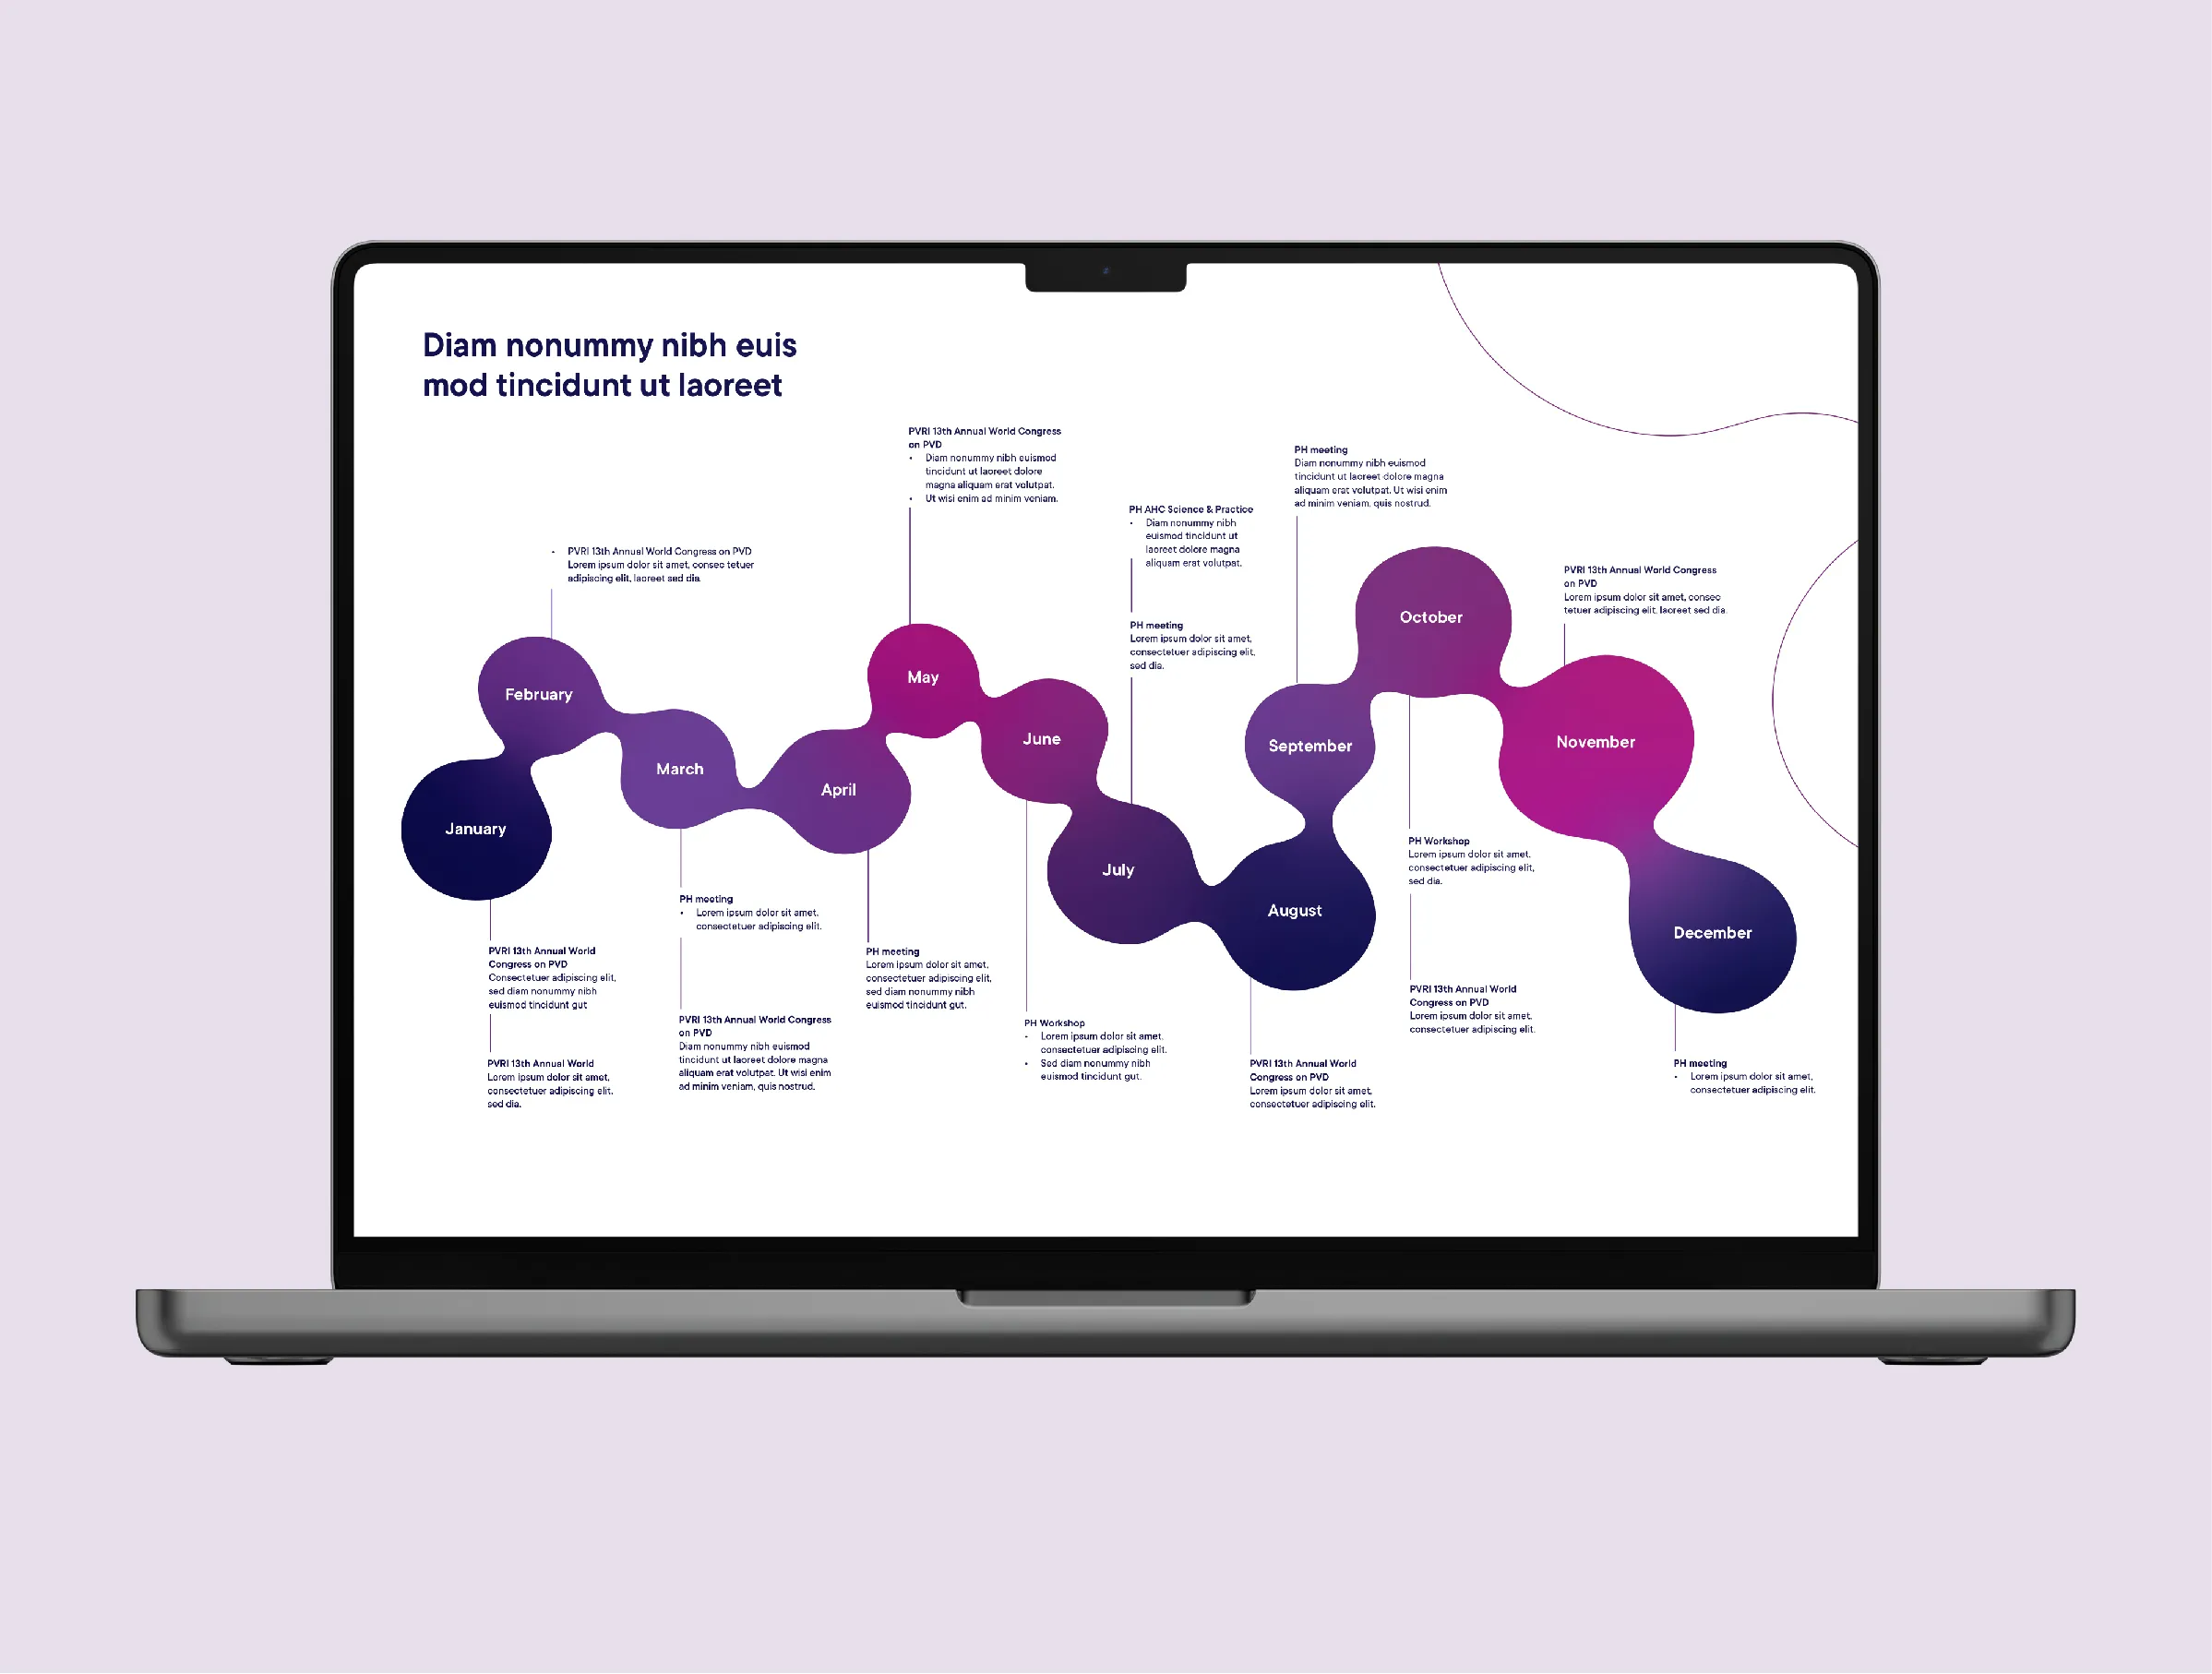 Timeline infographic created using PVRI's signature fluid shapes in shades of pink, plum, purple and indigo. Shown on a laptop screen.